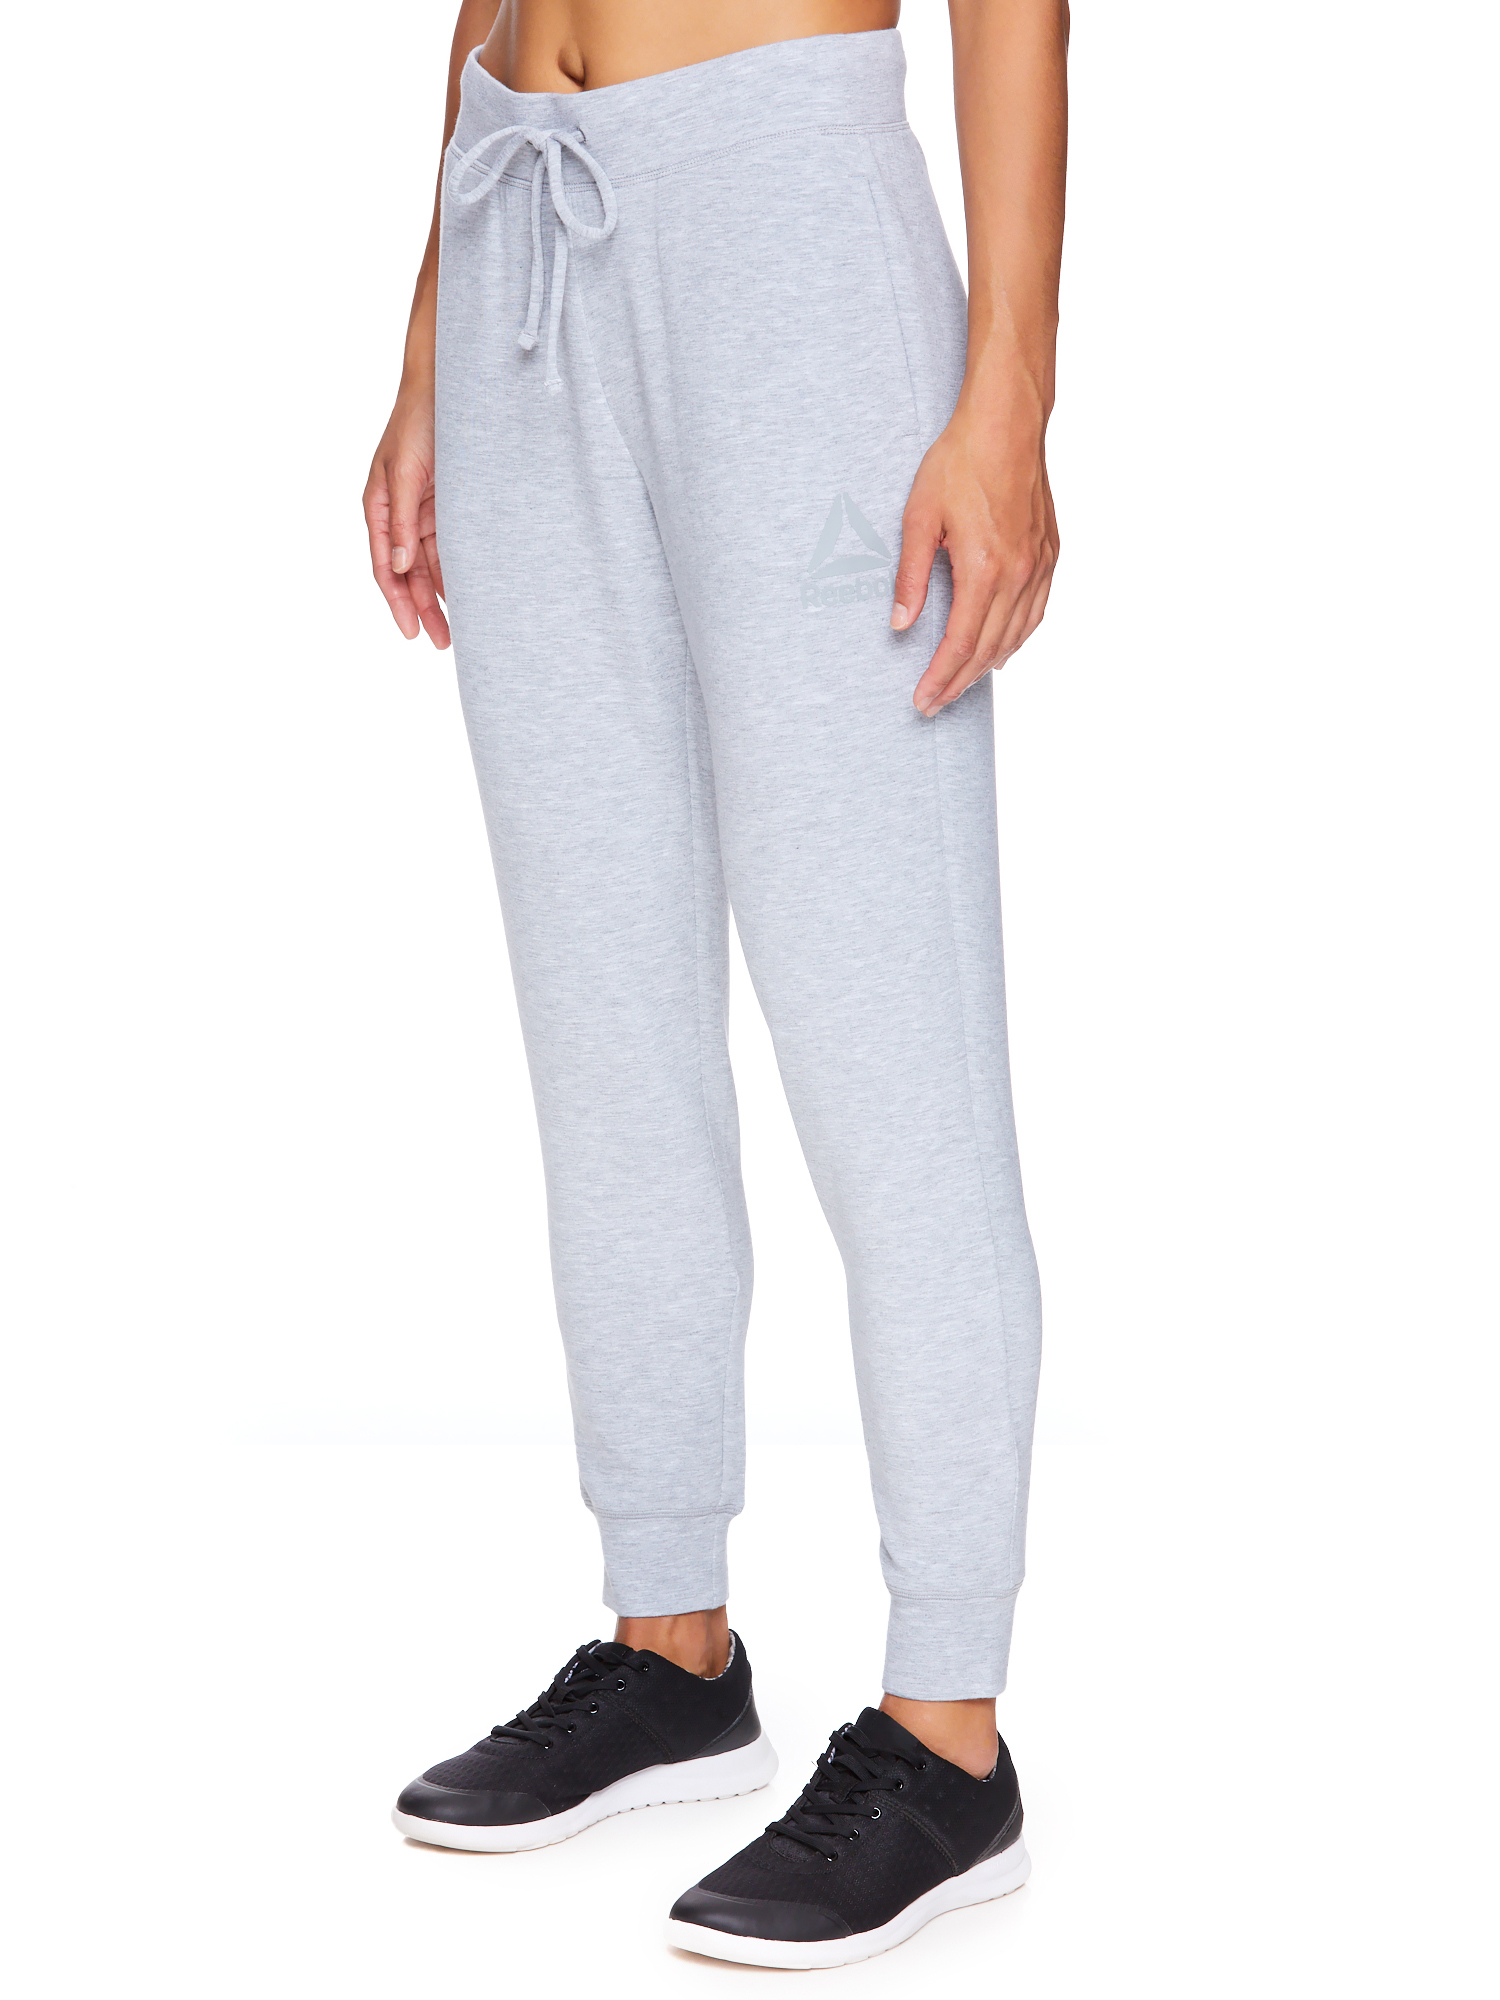 Reebok Womens Soft Jogger with Pockets - image 3 of 4